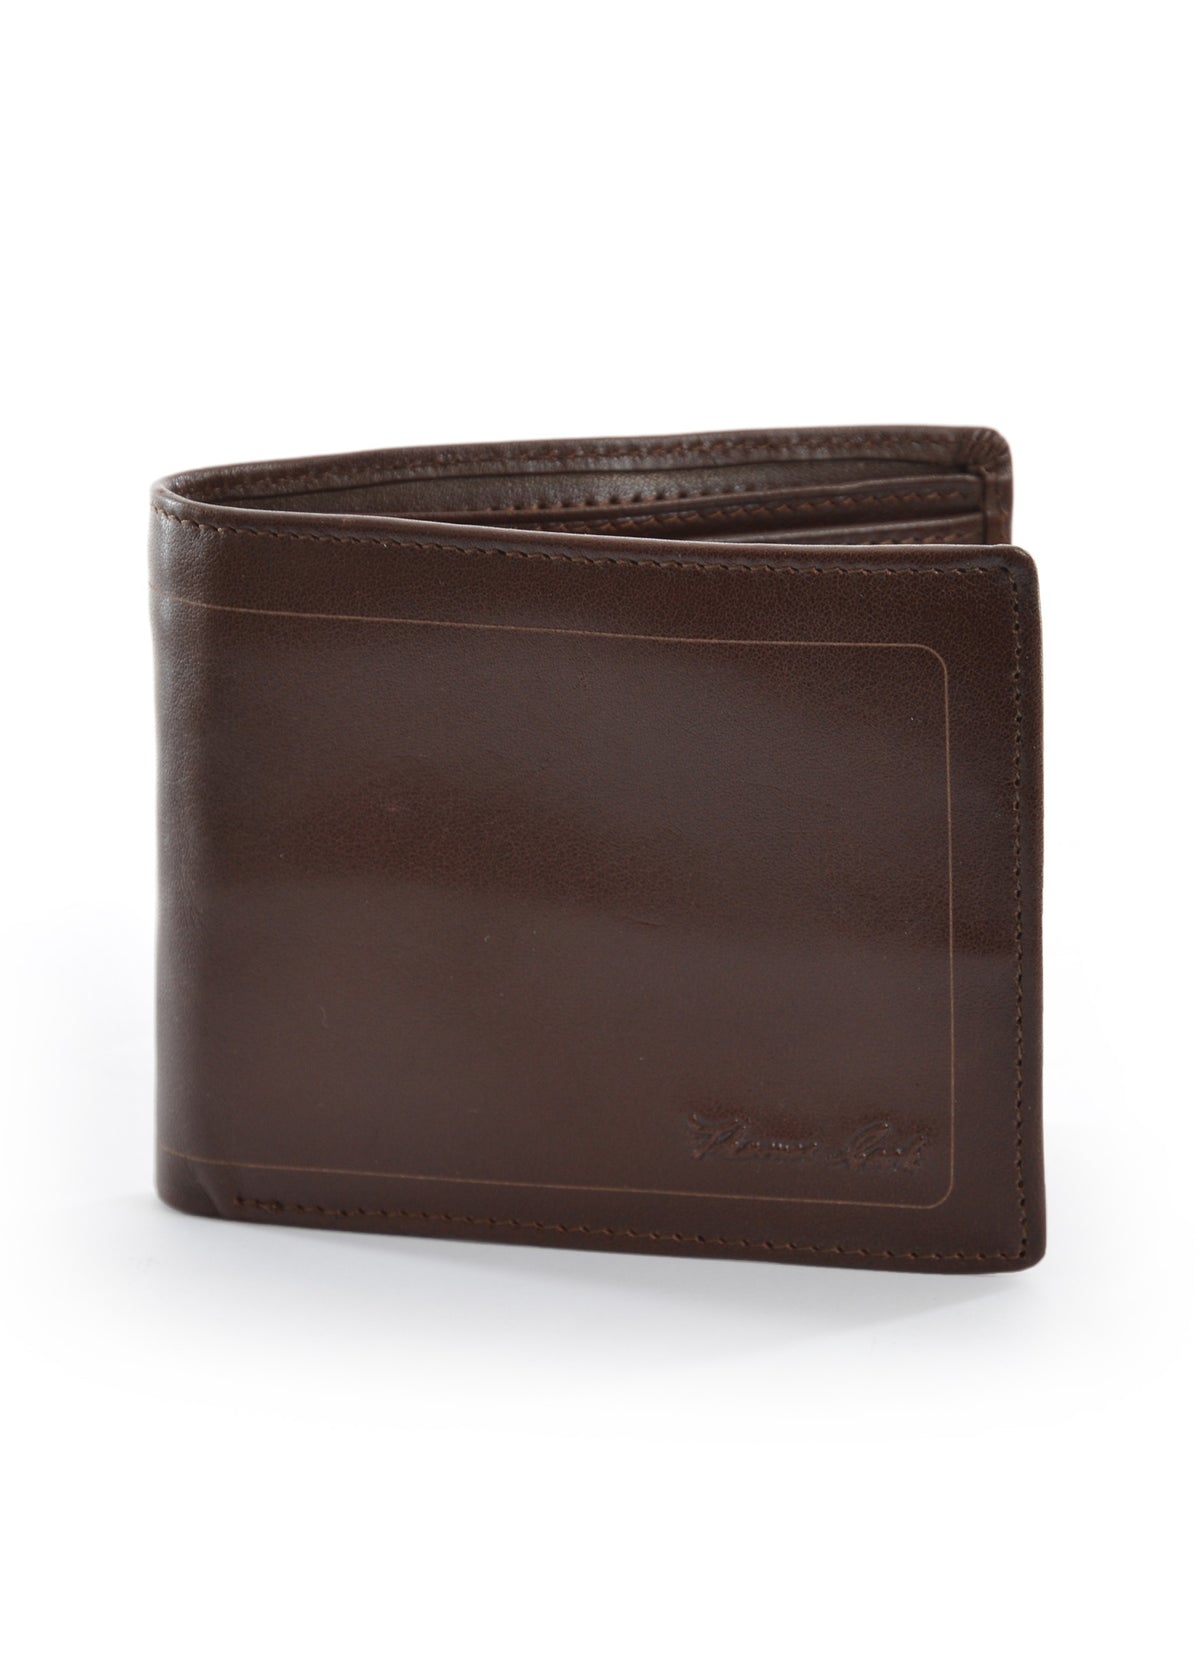 Thomas Cook Men's Leather Edged Wallet in Light Brown